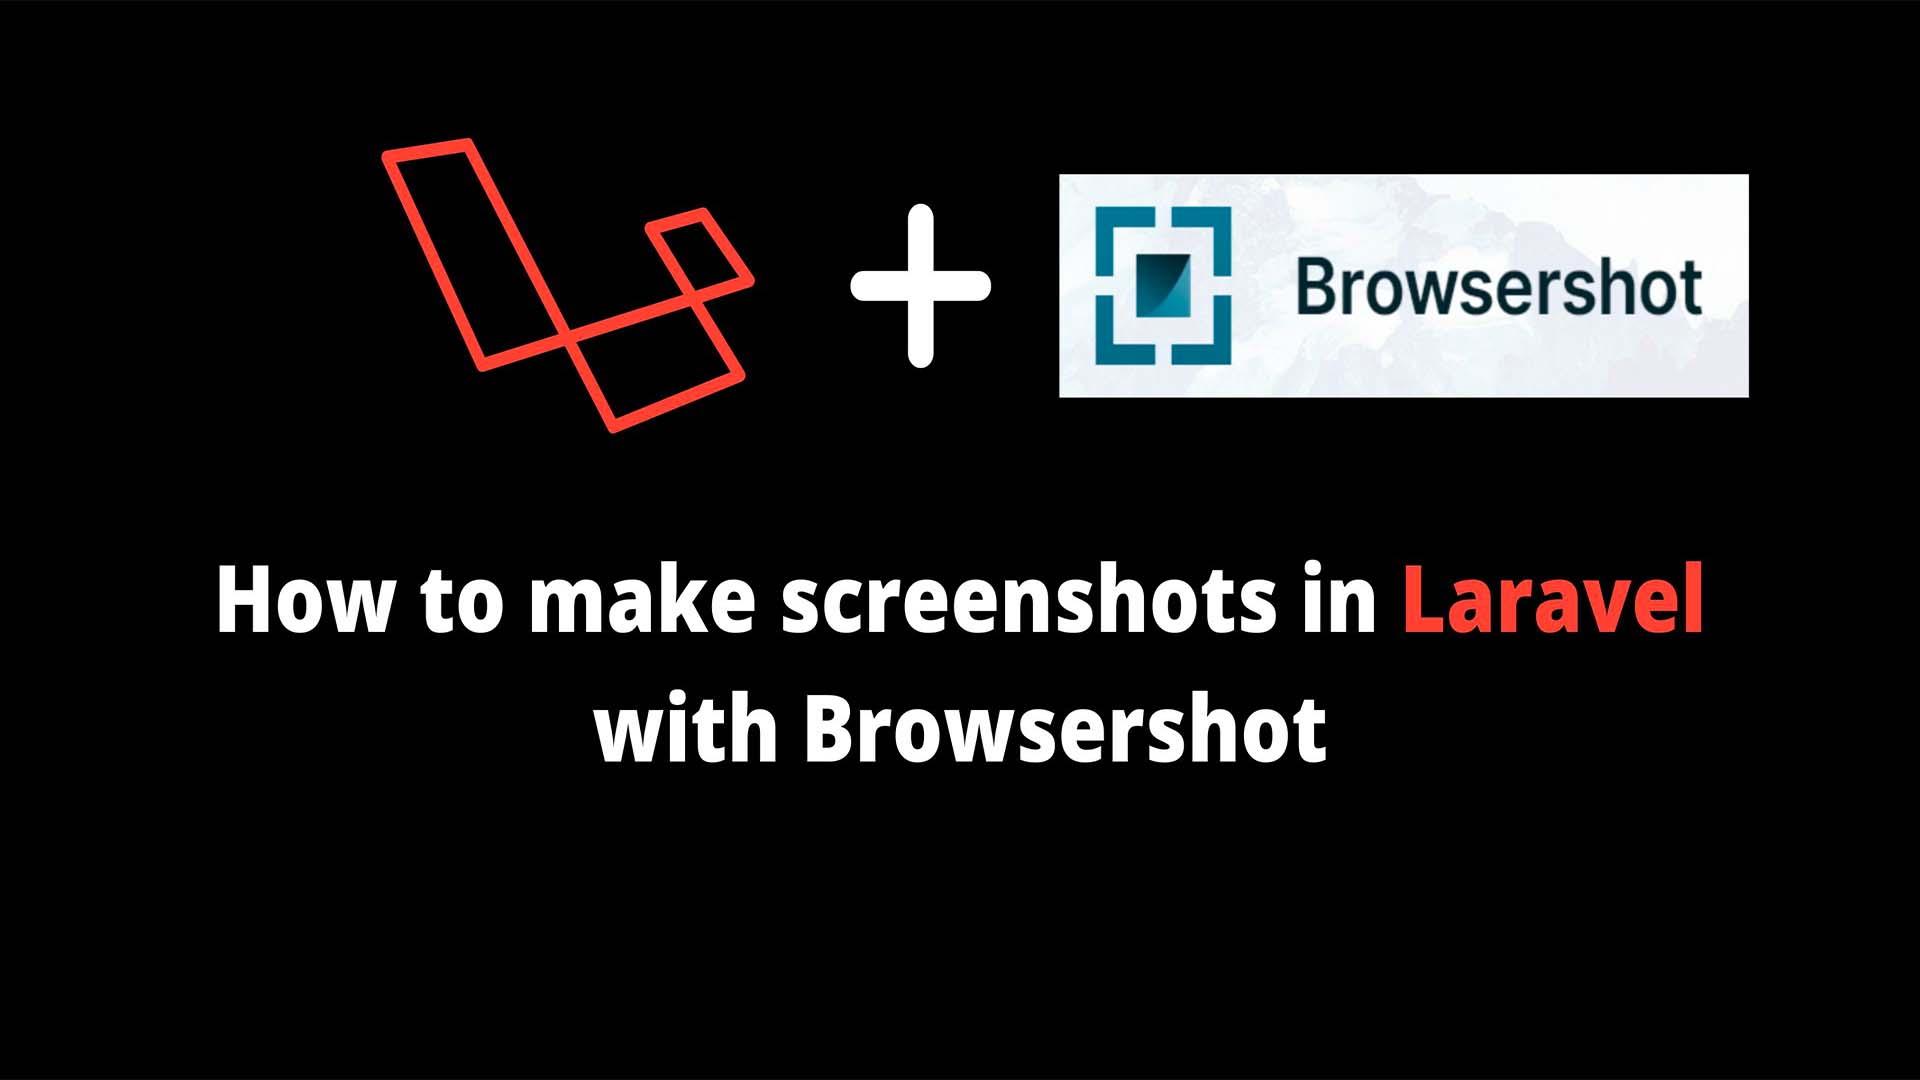 How to make screenshots in Laravel with Browsershot